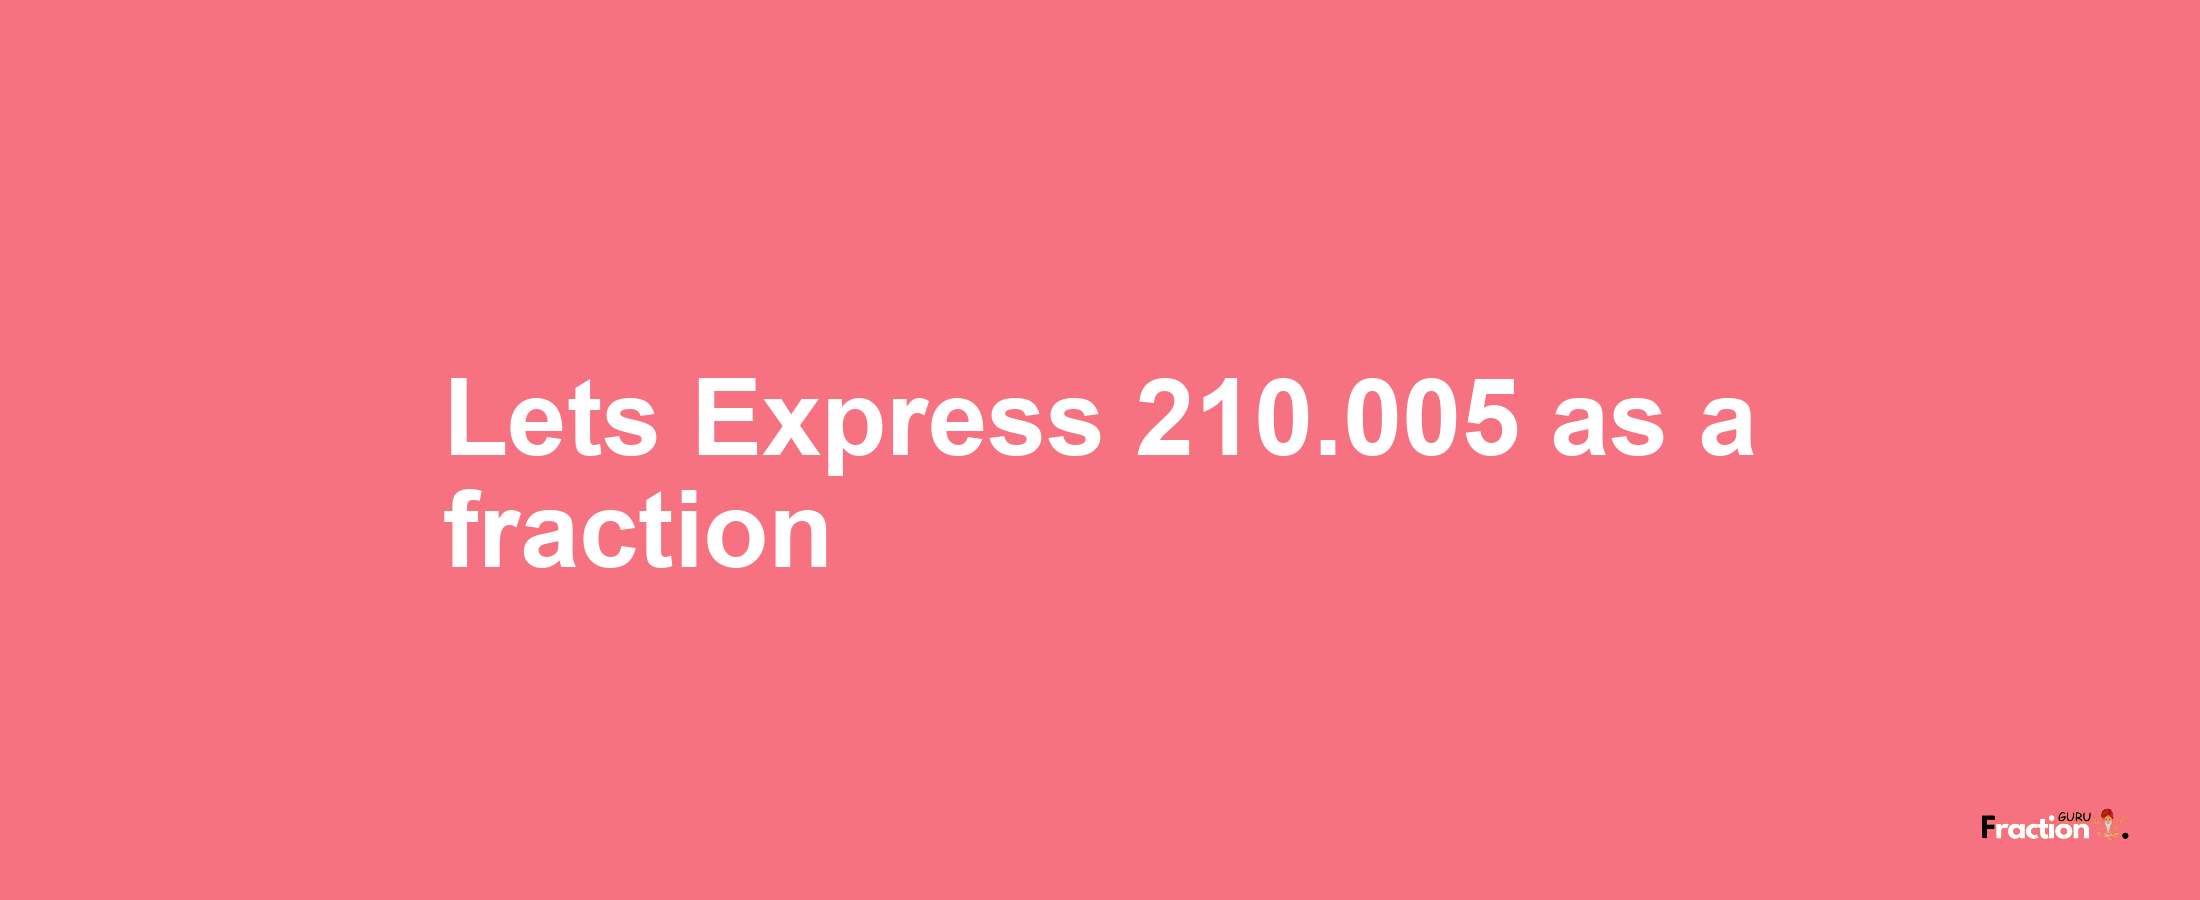 Lets Express 210.005 as afraction